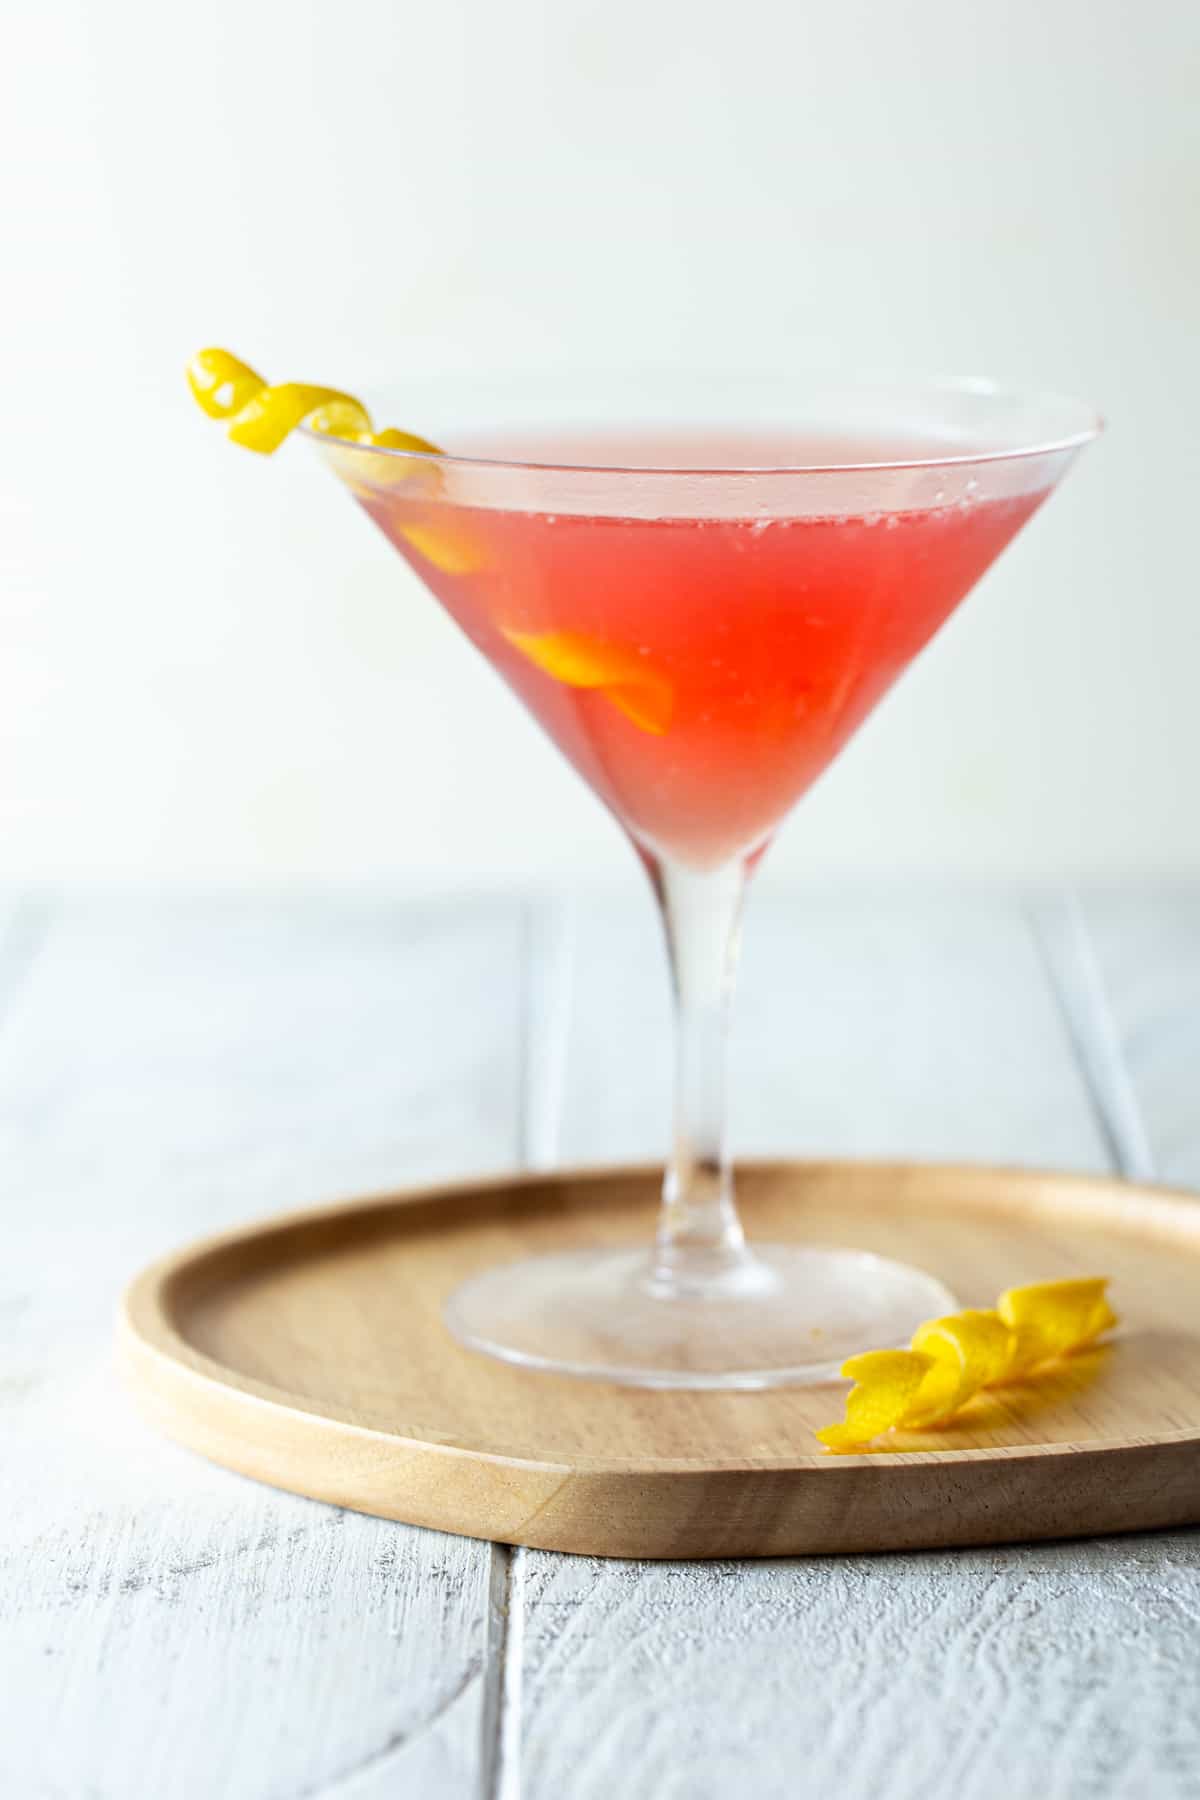 single martini glass filled with pink drink on wooden tray with lemon twist